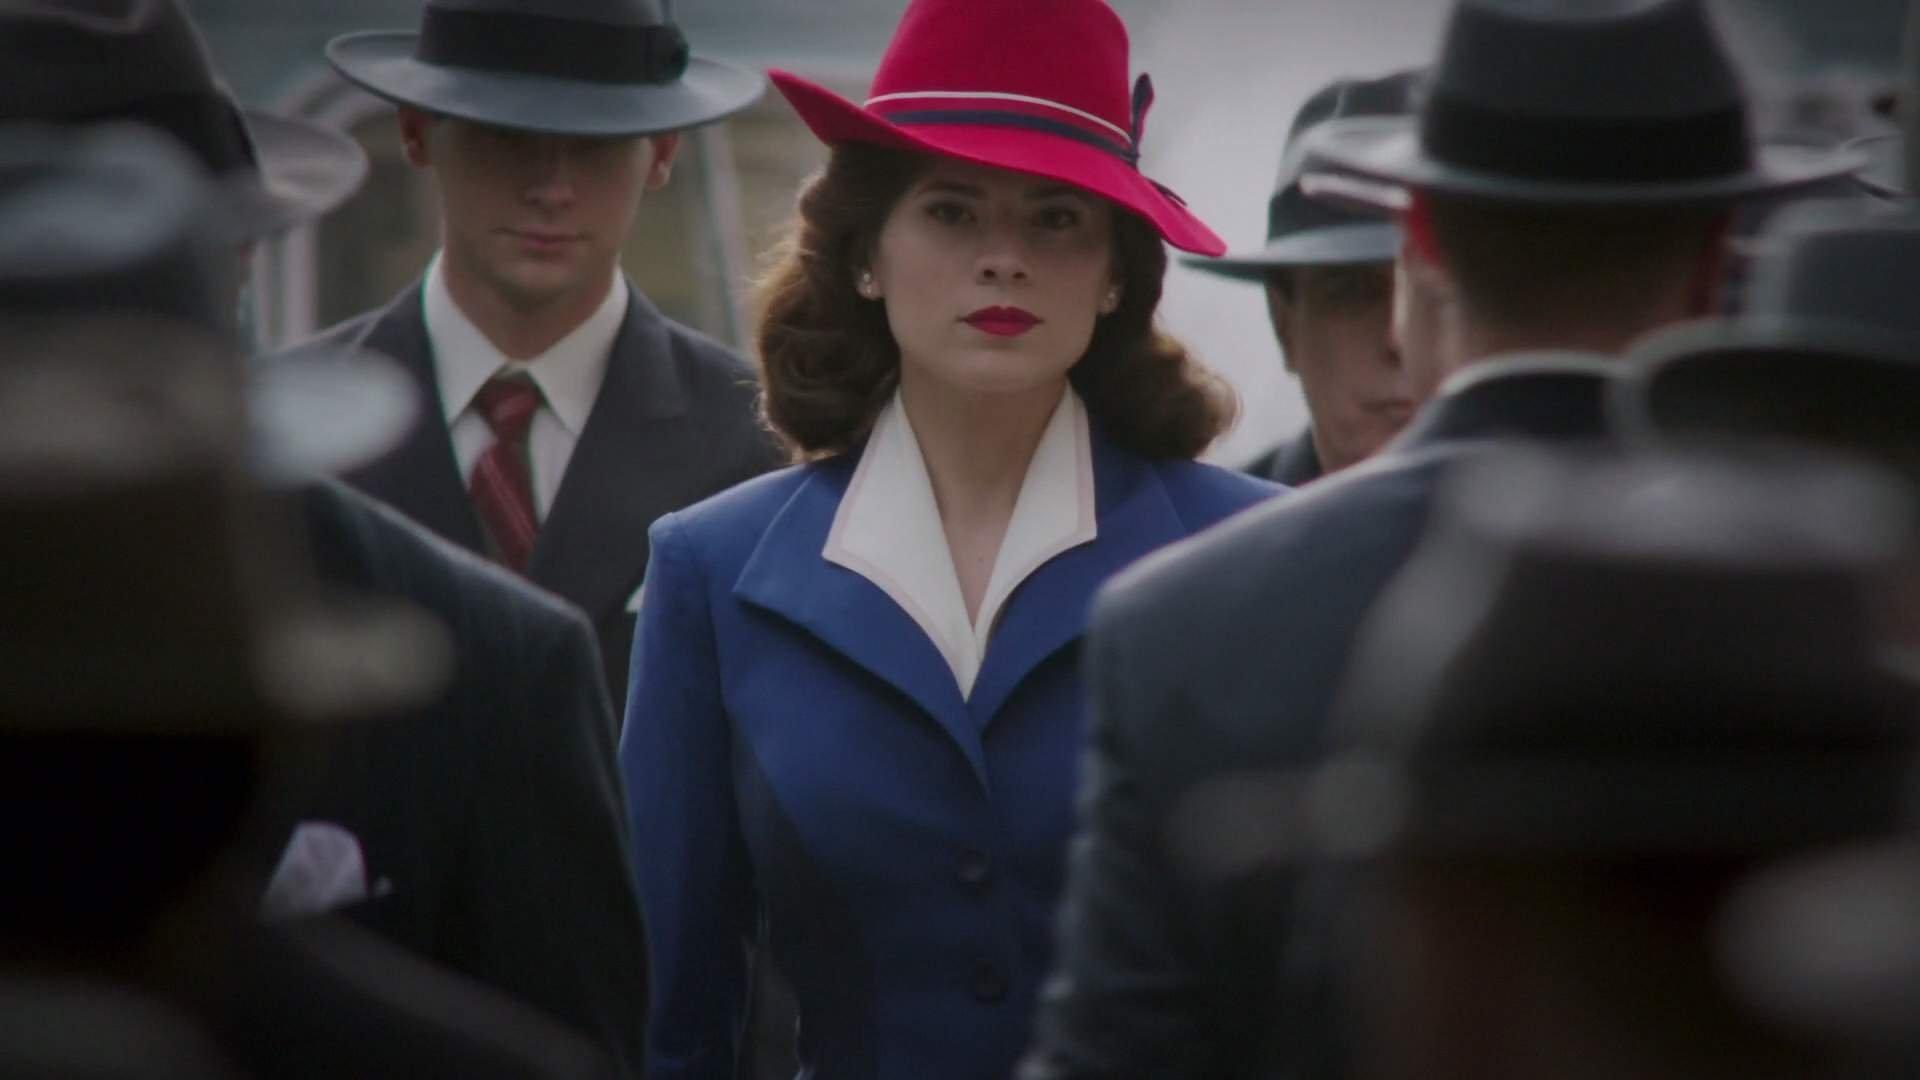 Peggy Carter shows that you don't need superpowers to be a